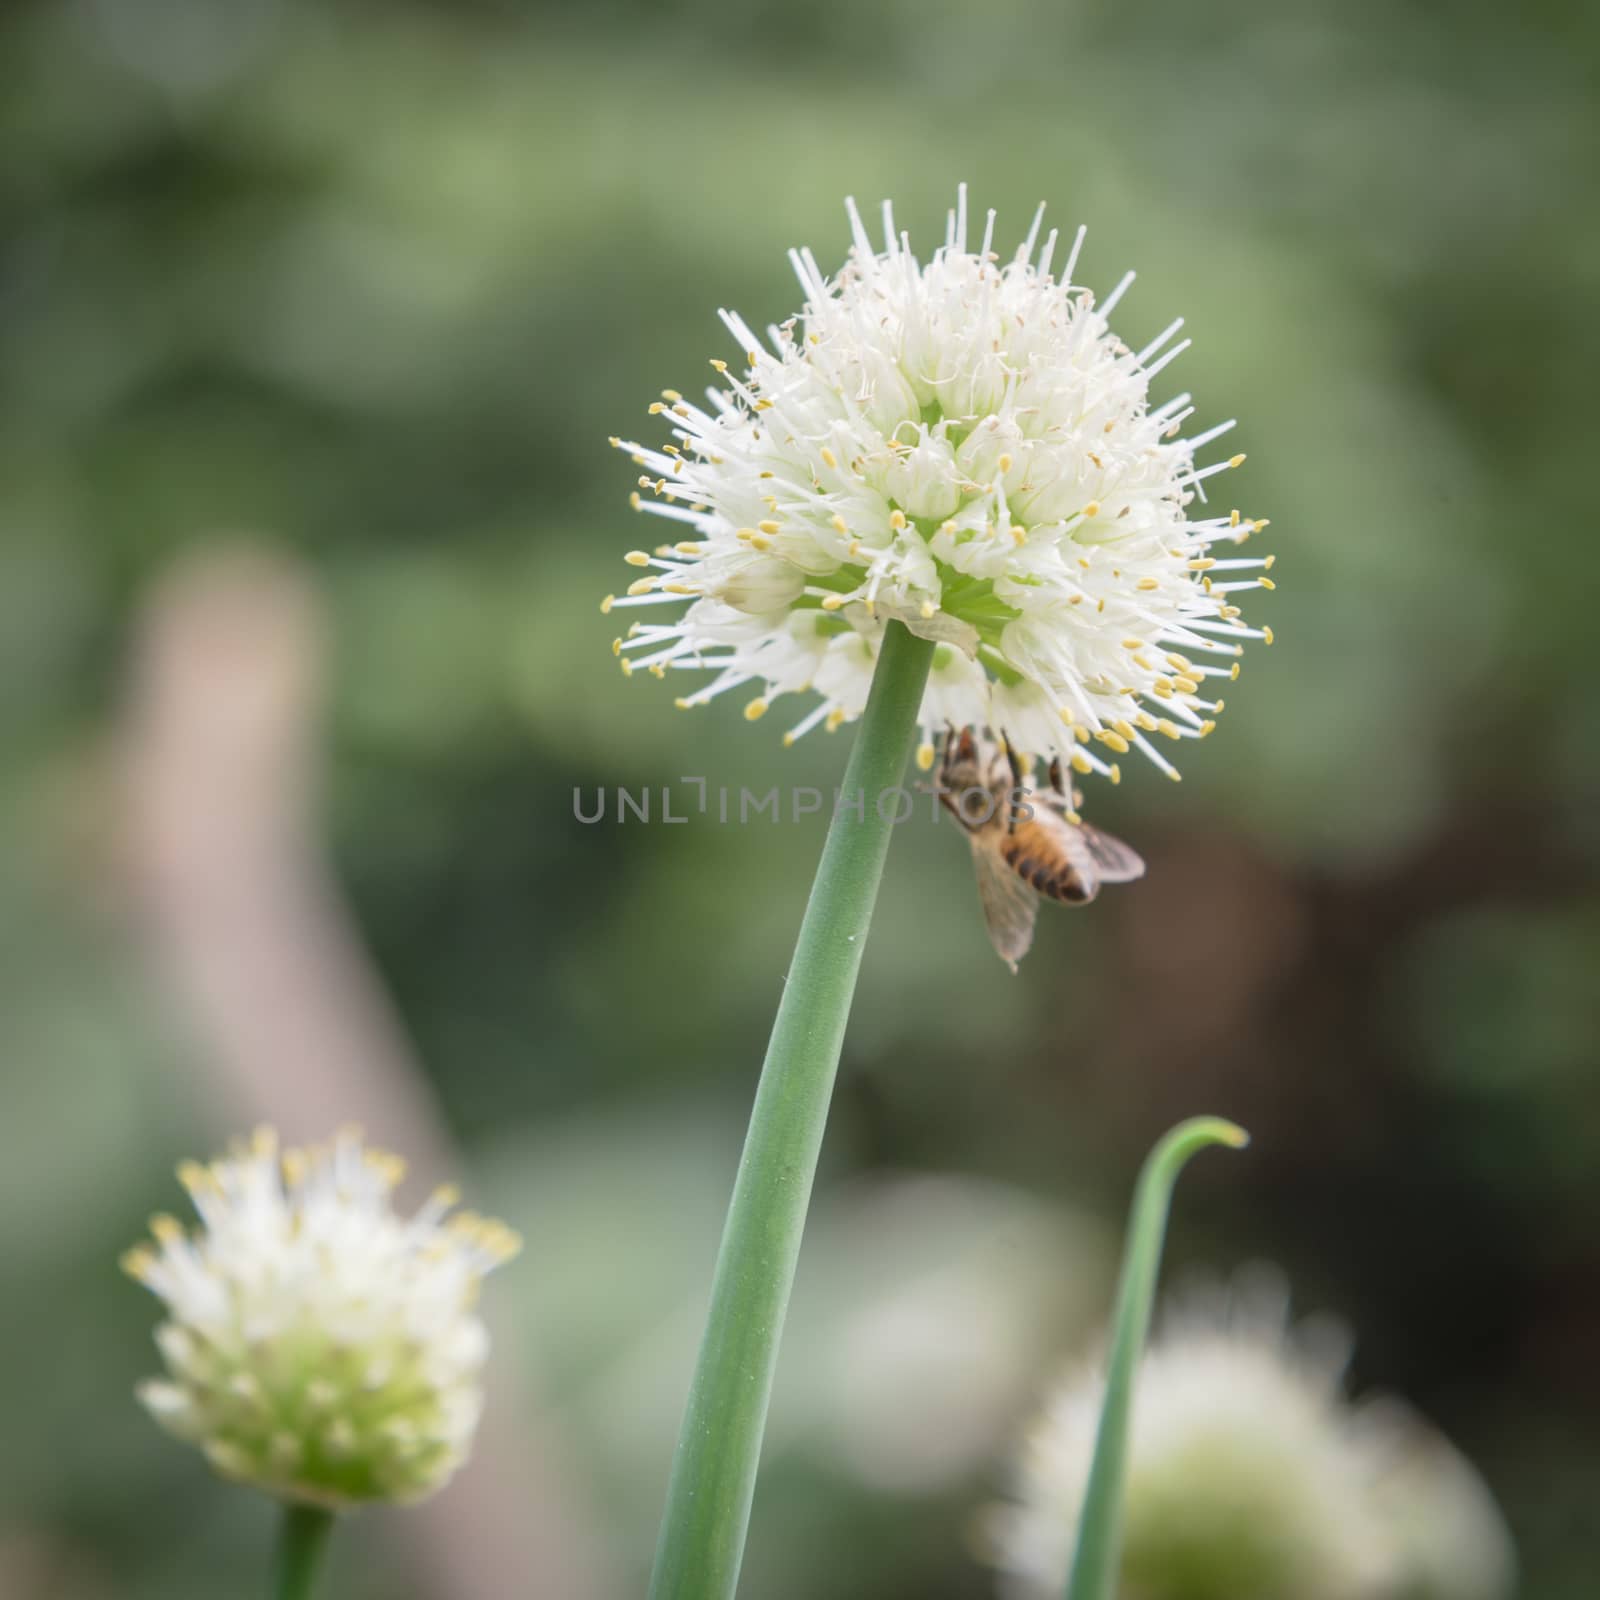 Bee working on green onion scallions flowering at organic garden in rural Vietnam during Spring time. Spice herb flower buds close-up